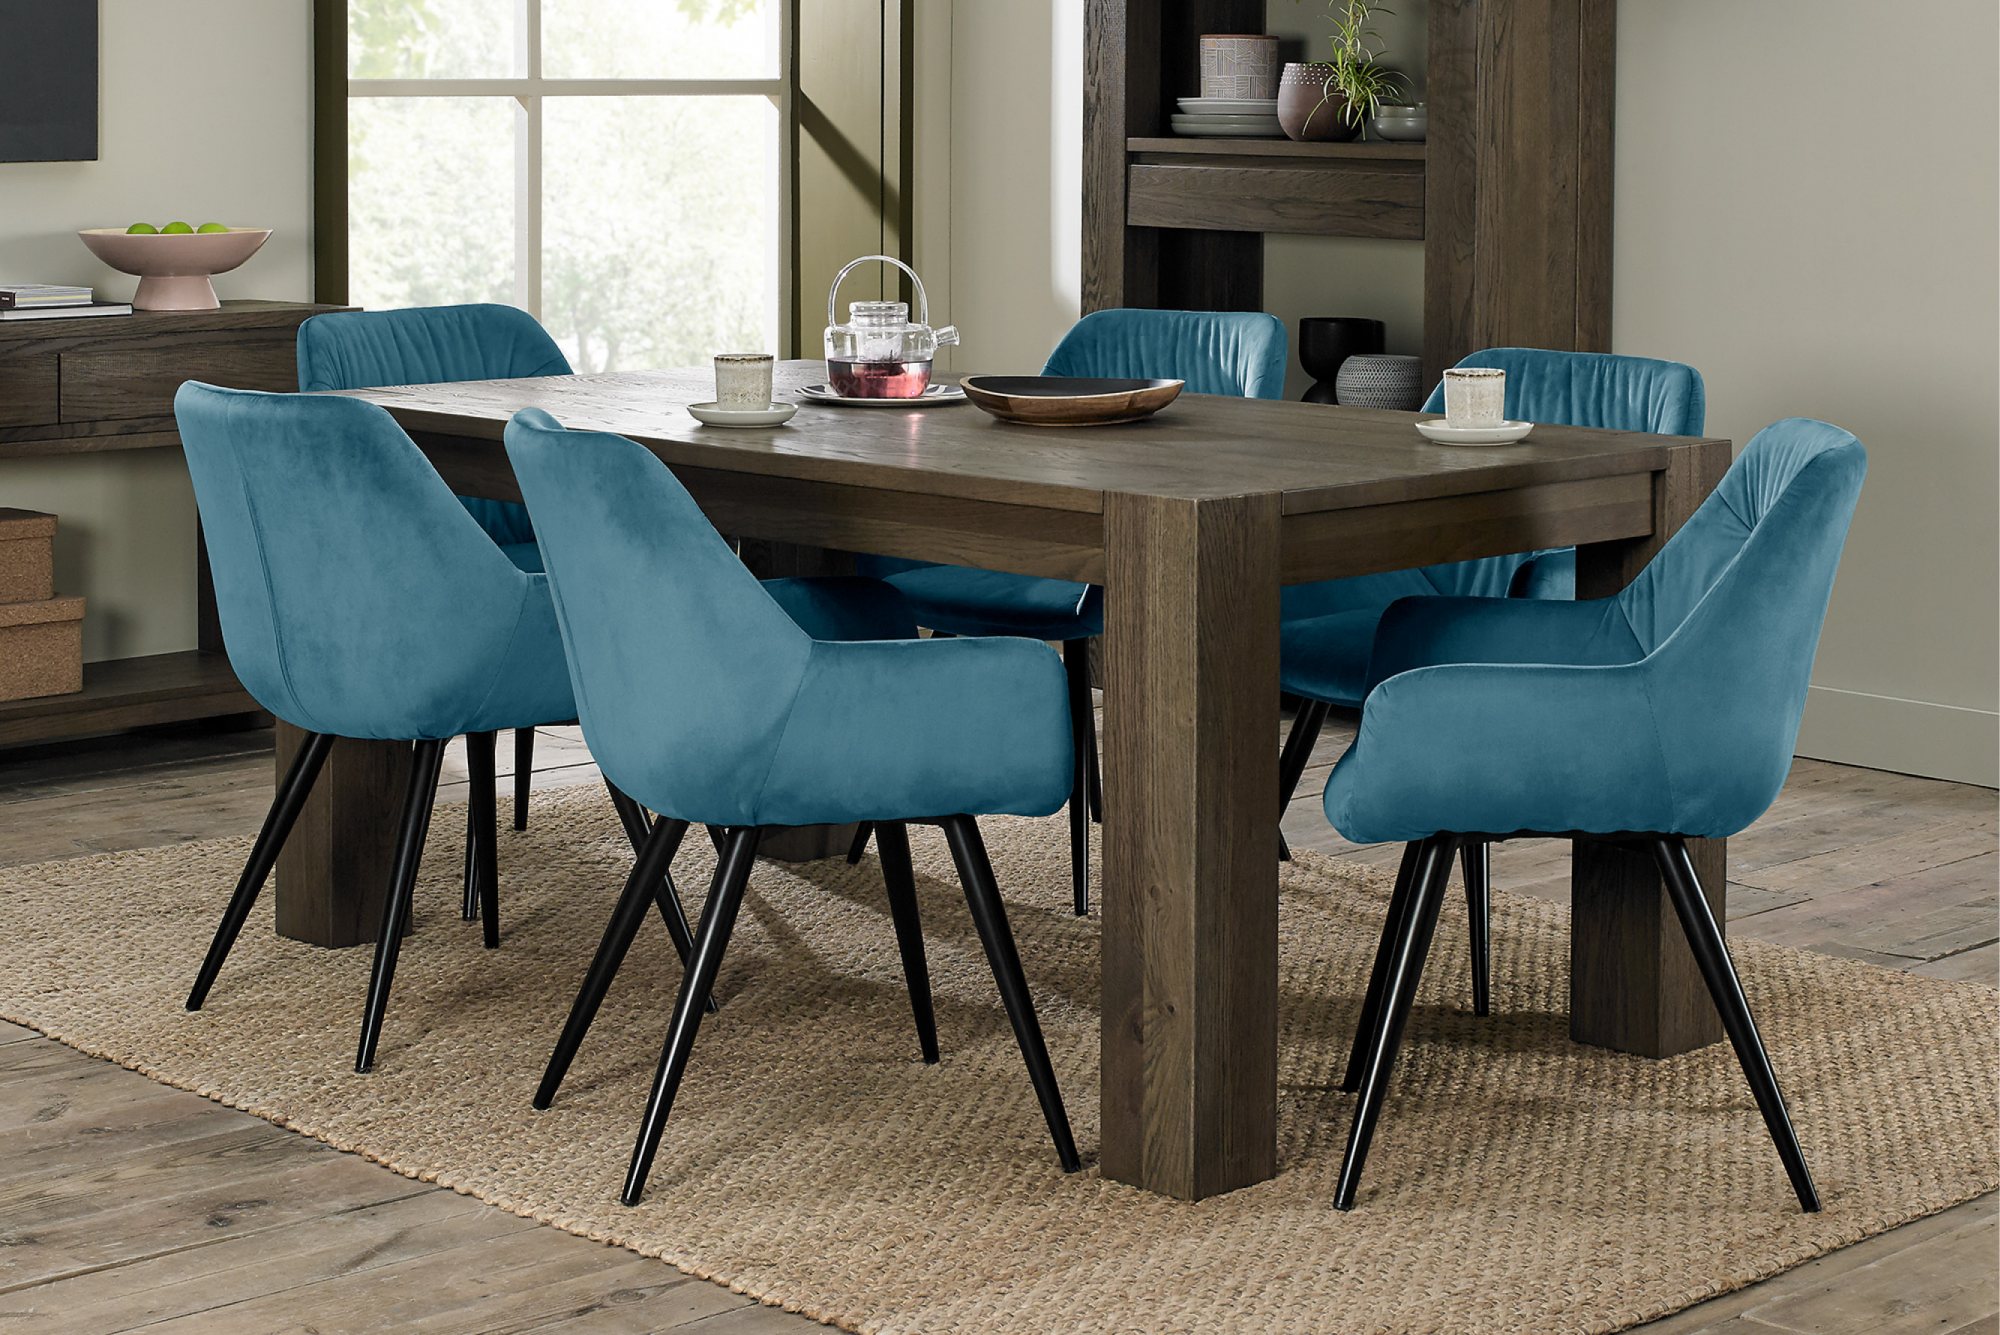 Home Origins Constable Fumed Oak 6 Seater Dining Set- 6 Dali Dining Chairs- Petrol Blue Velvet Fabric